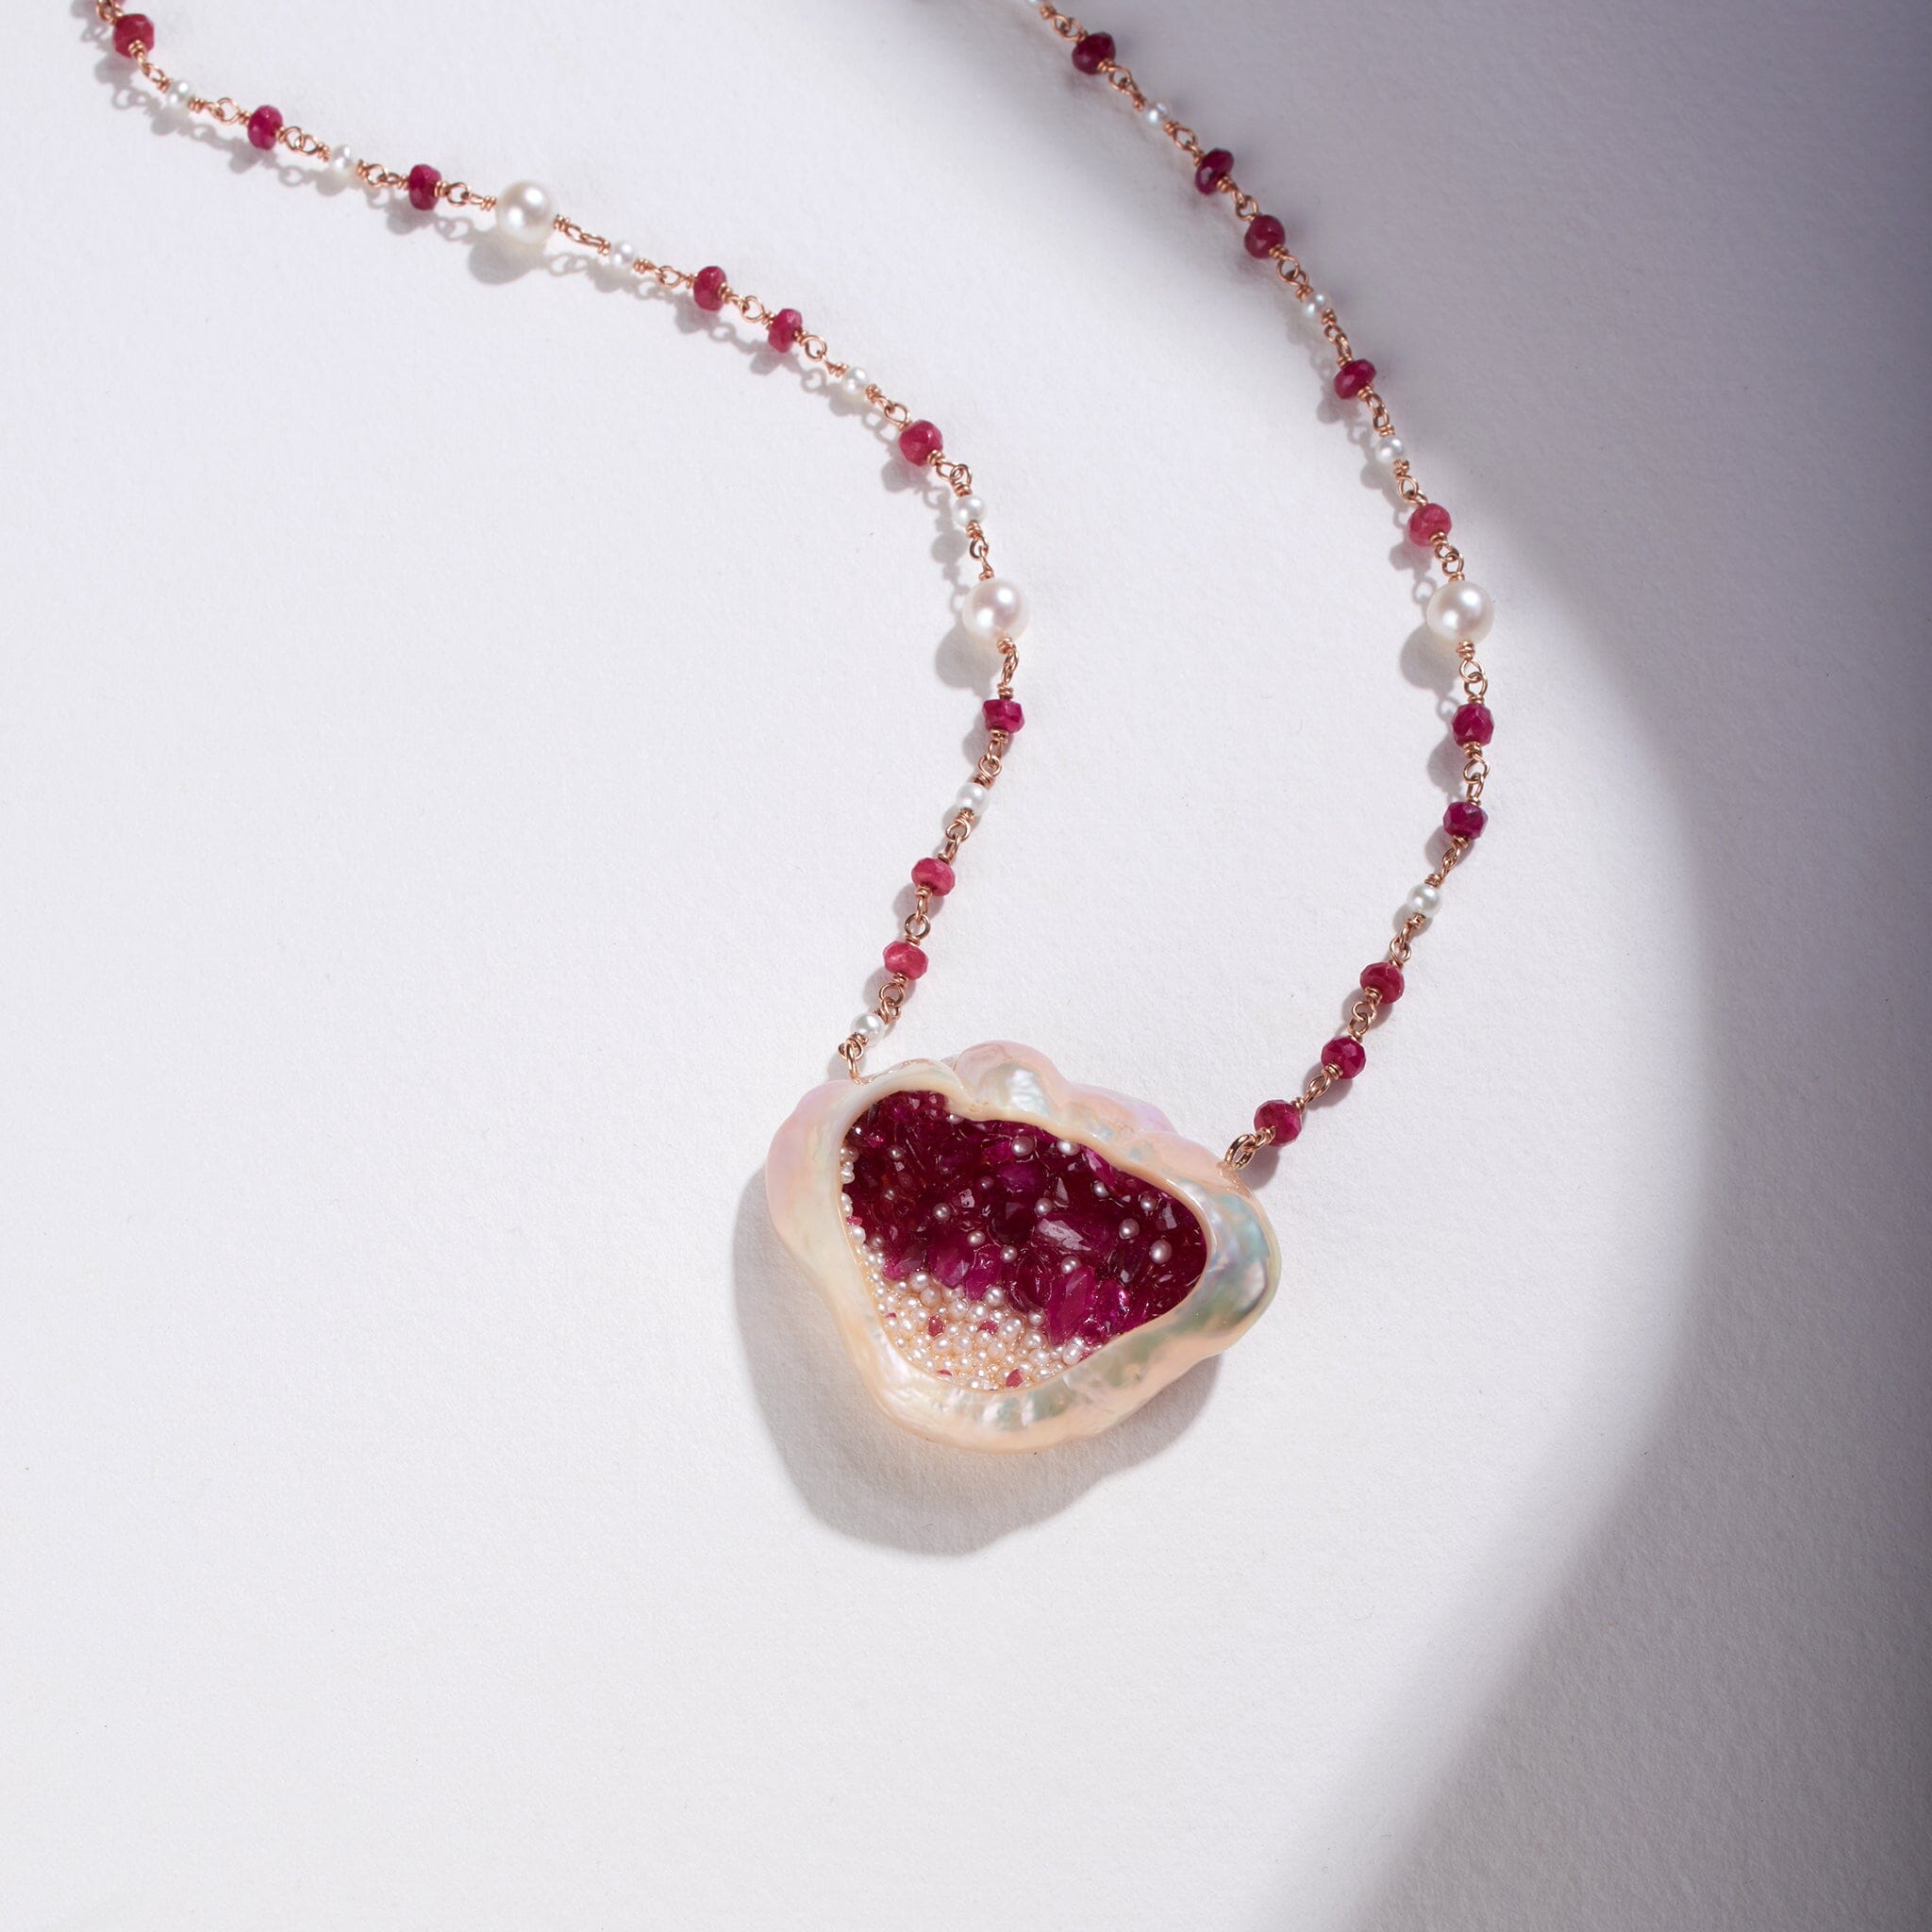 Freshwater Souffle Pearl Finestrino Necklace with Seed Pearls, Akoya Pearls, and Rubies